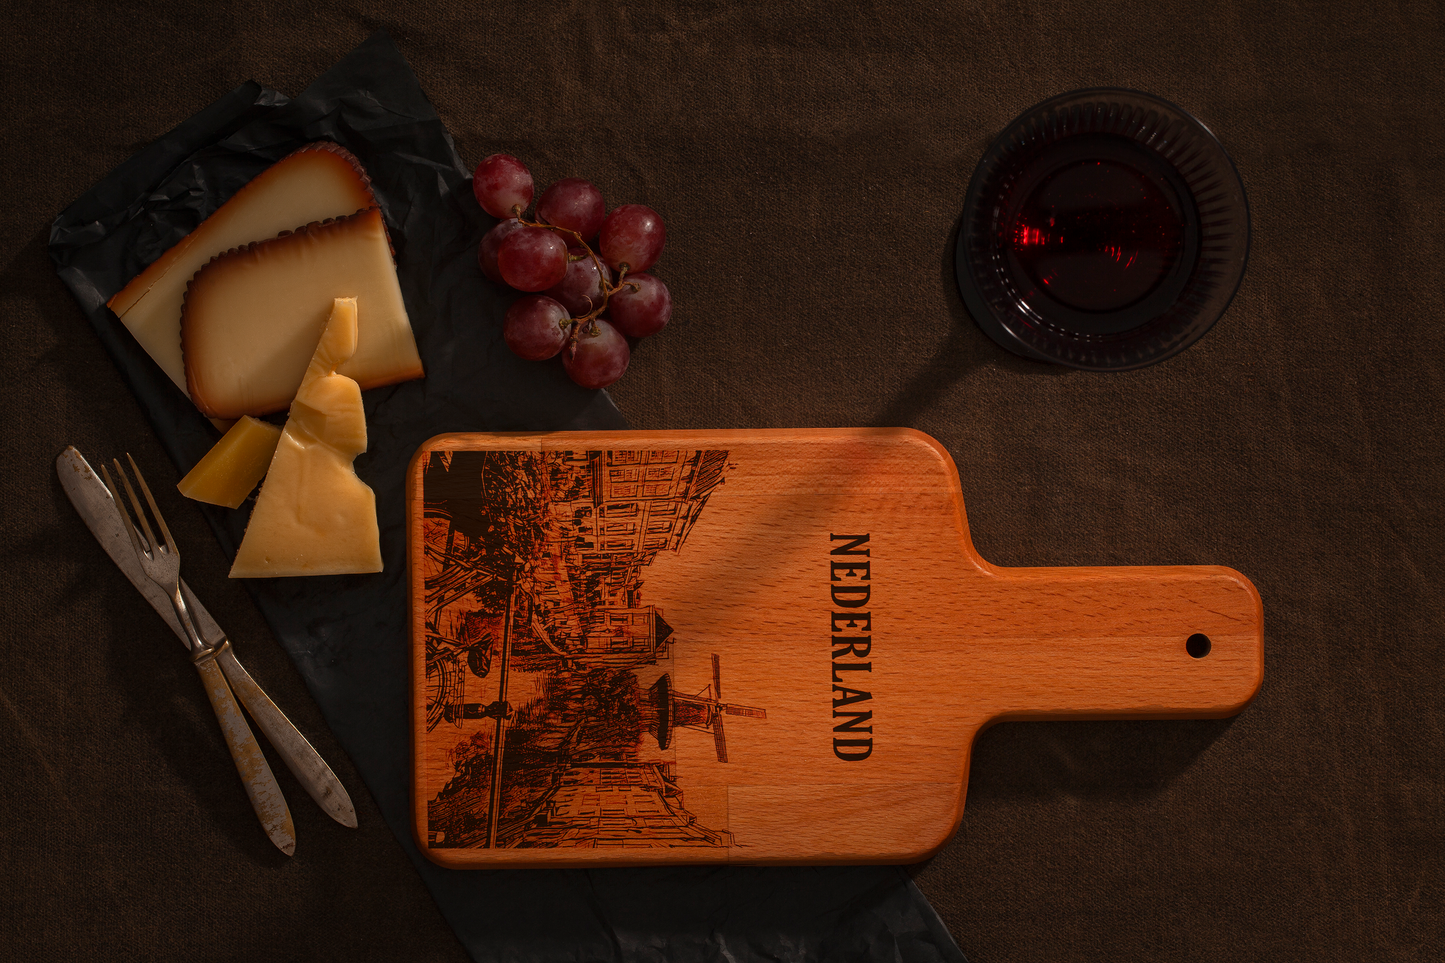 Nederland, City View, cheese board, antimicrobial